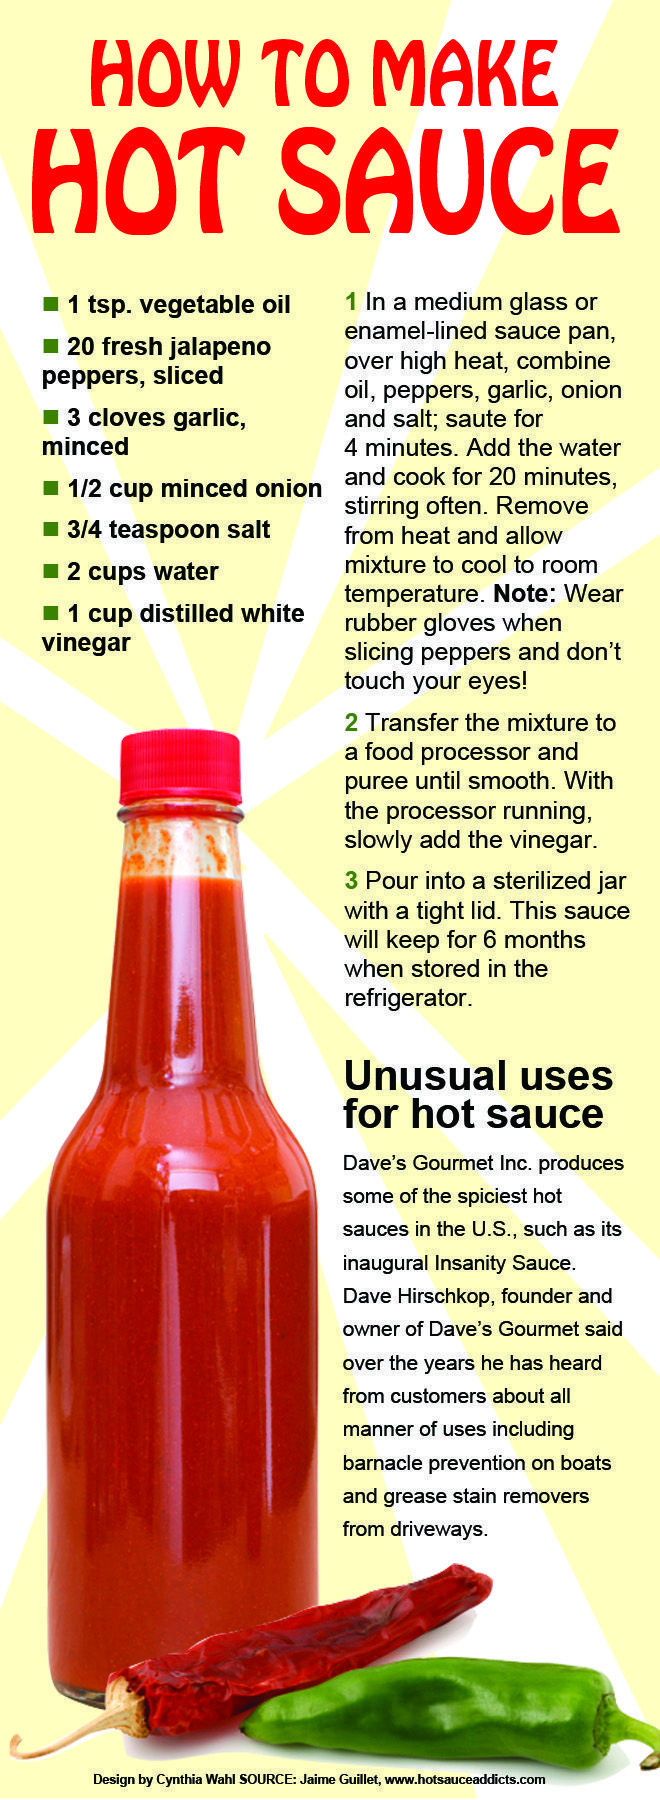 How to Bottle Sauces | eHow.com